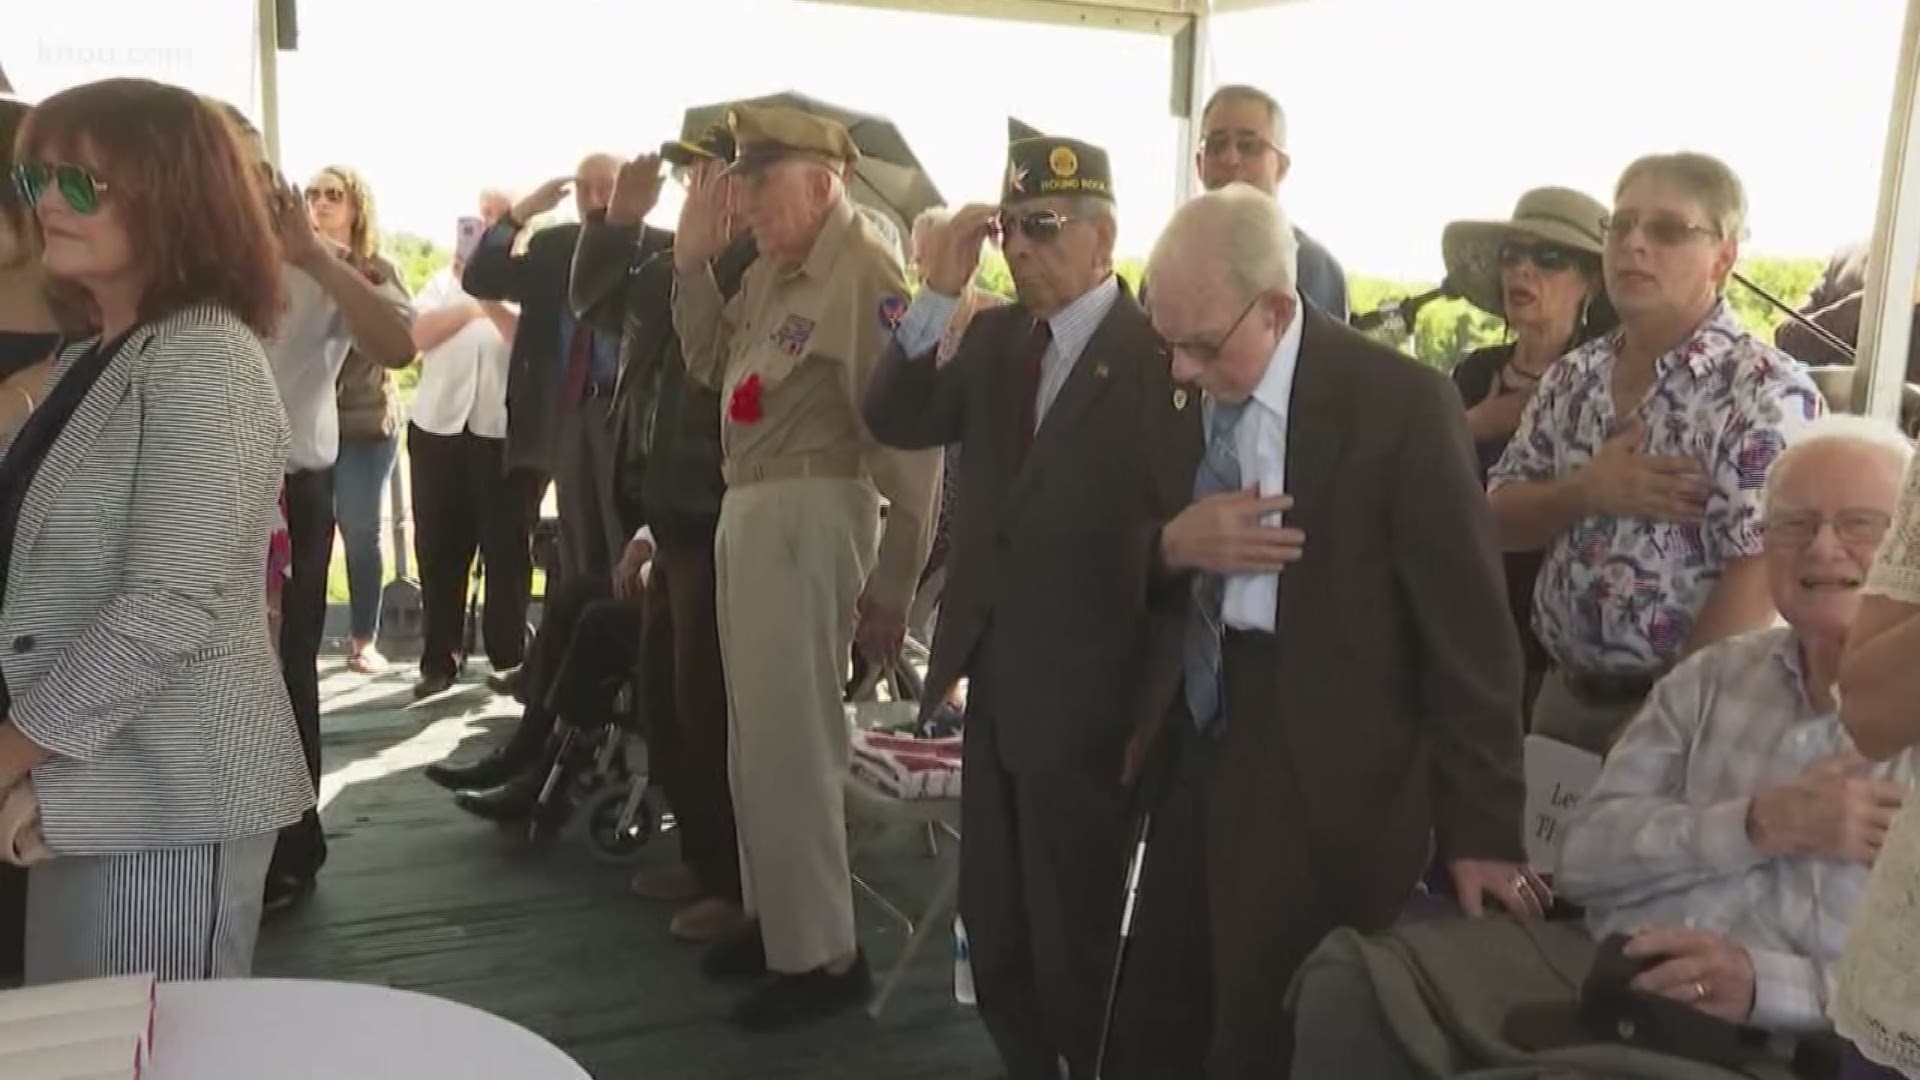 There are ceremonies for the 75th anniversary of D-Day across the country honoring those brave men who survived the siege and those who lost their lives in France.